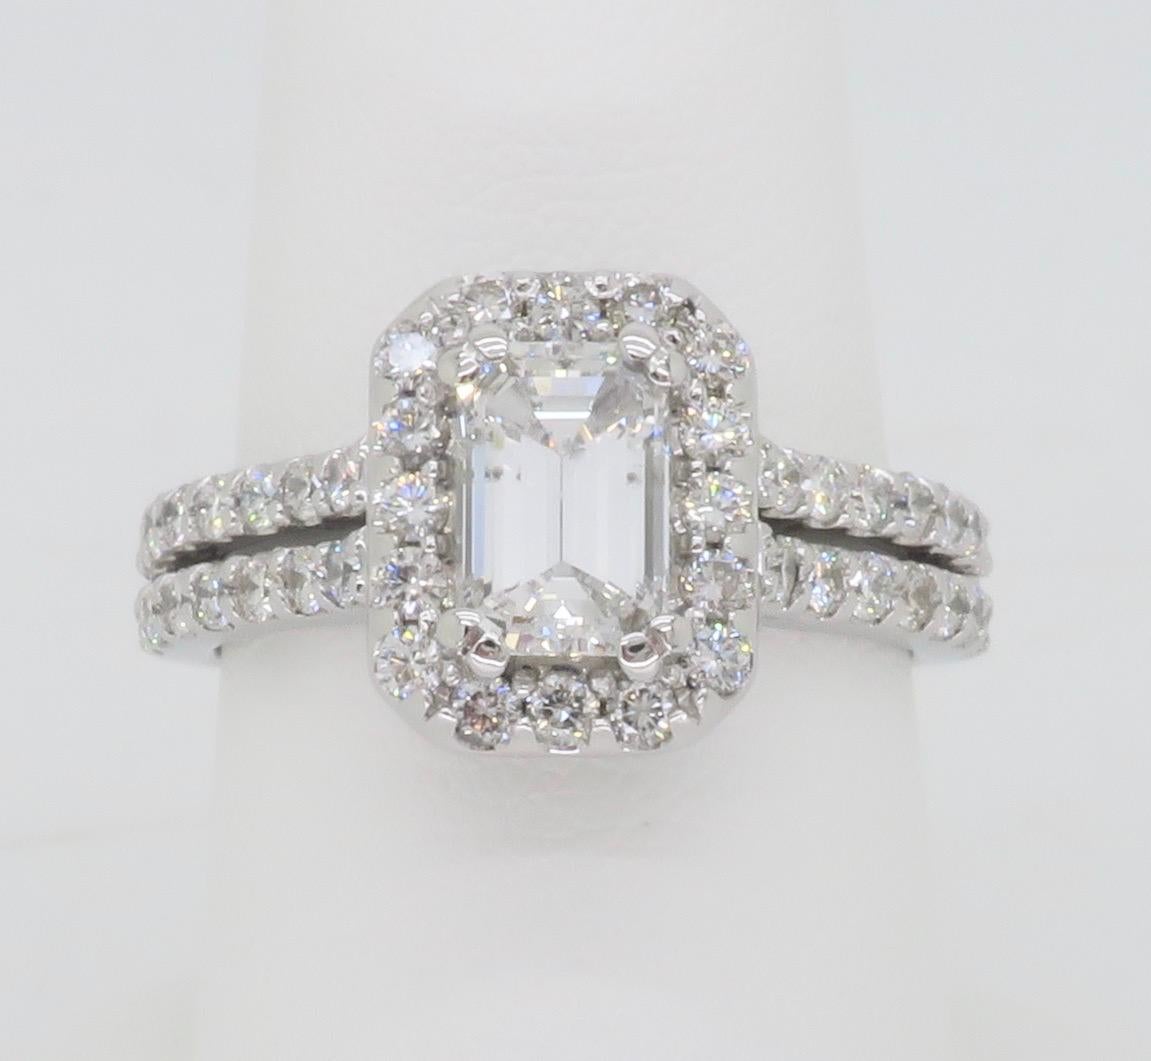 2.14CTW Diamond engagement ring with an AGS Certified Emerald Cut center diamond. 

Center Diamond Carat Weight: 1.26CT 
Center Diamond Cut: Emerald Cut 
Center Diamond Color: E
Center Diamond Clarity: SI2
Certification: AGS - 104098681010
Total